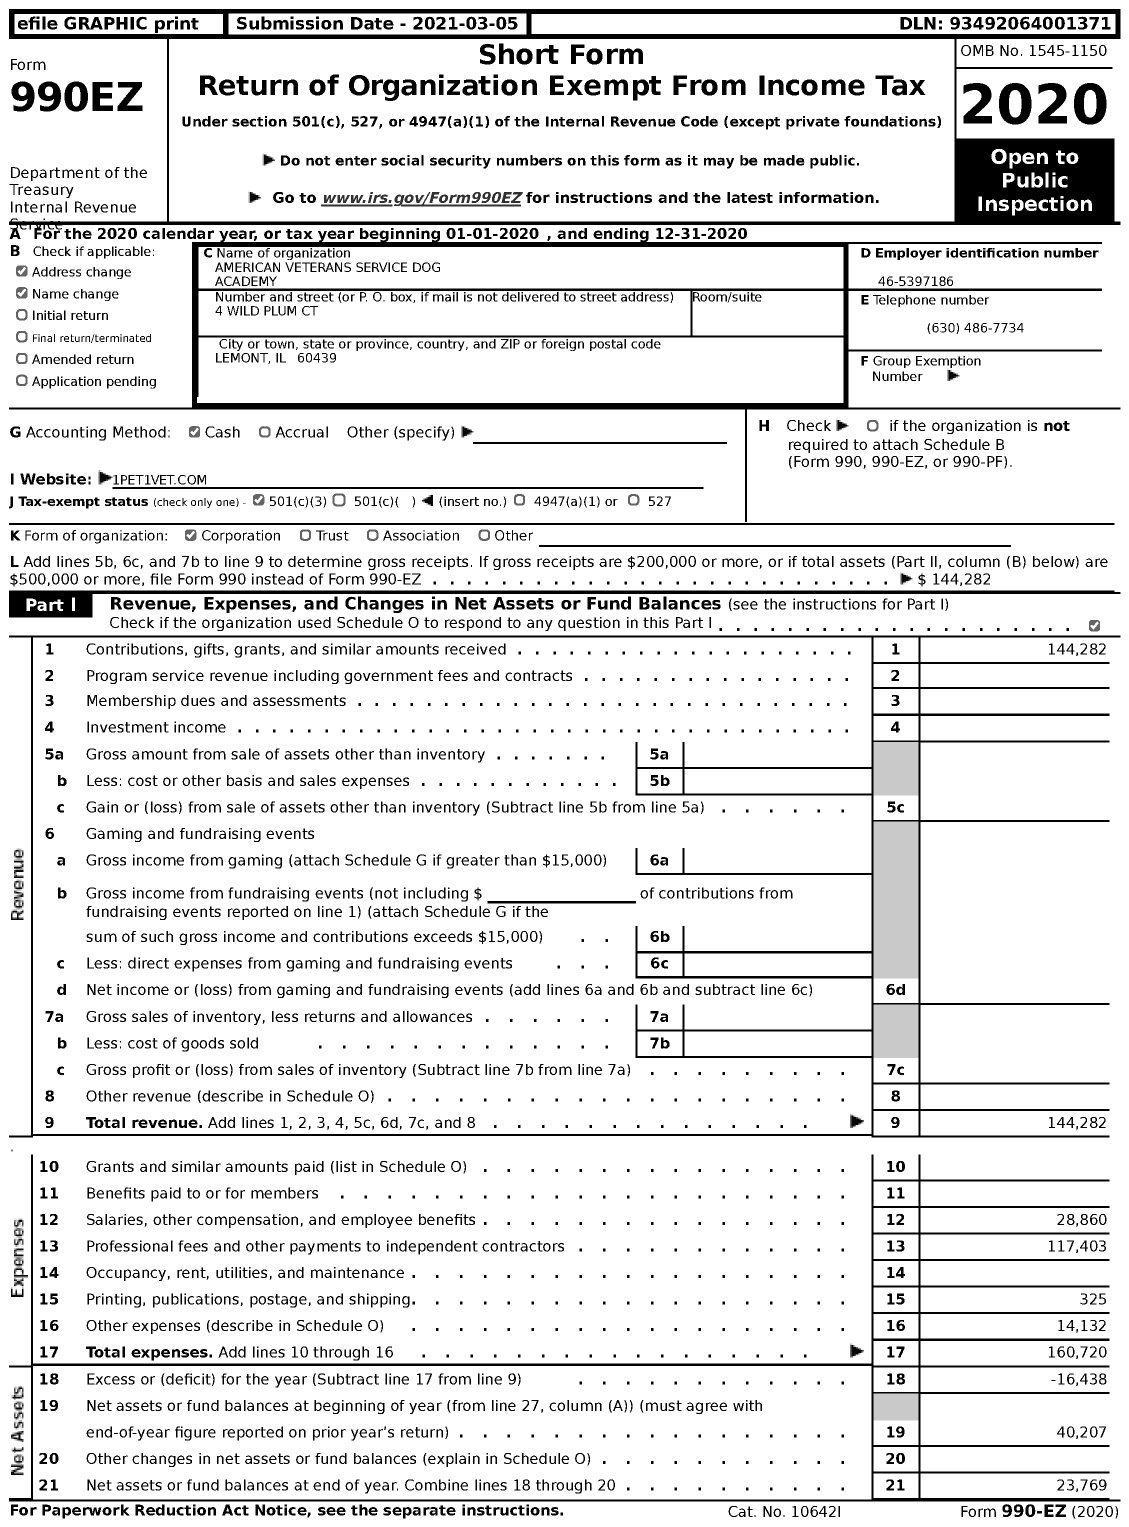 Image of first page of 2020 Form 990EZ for American Veterans Service Dog Academy